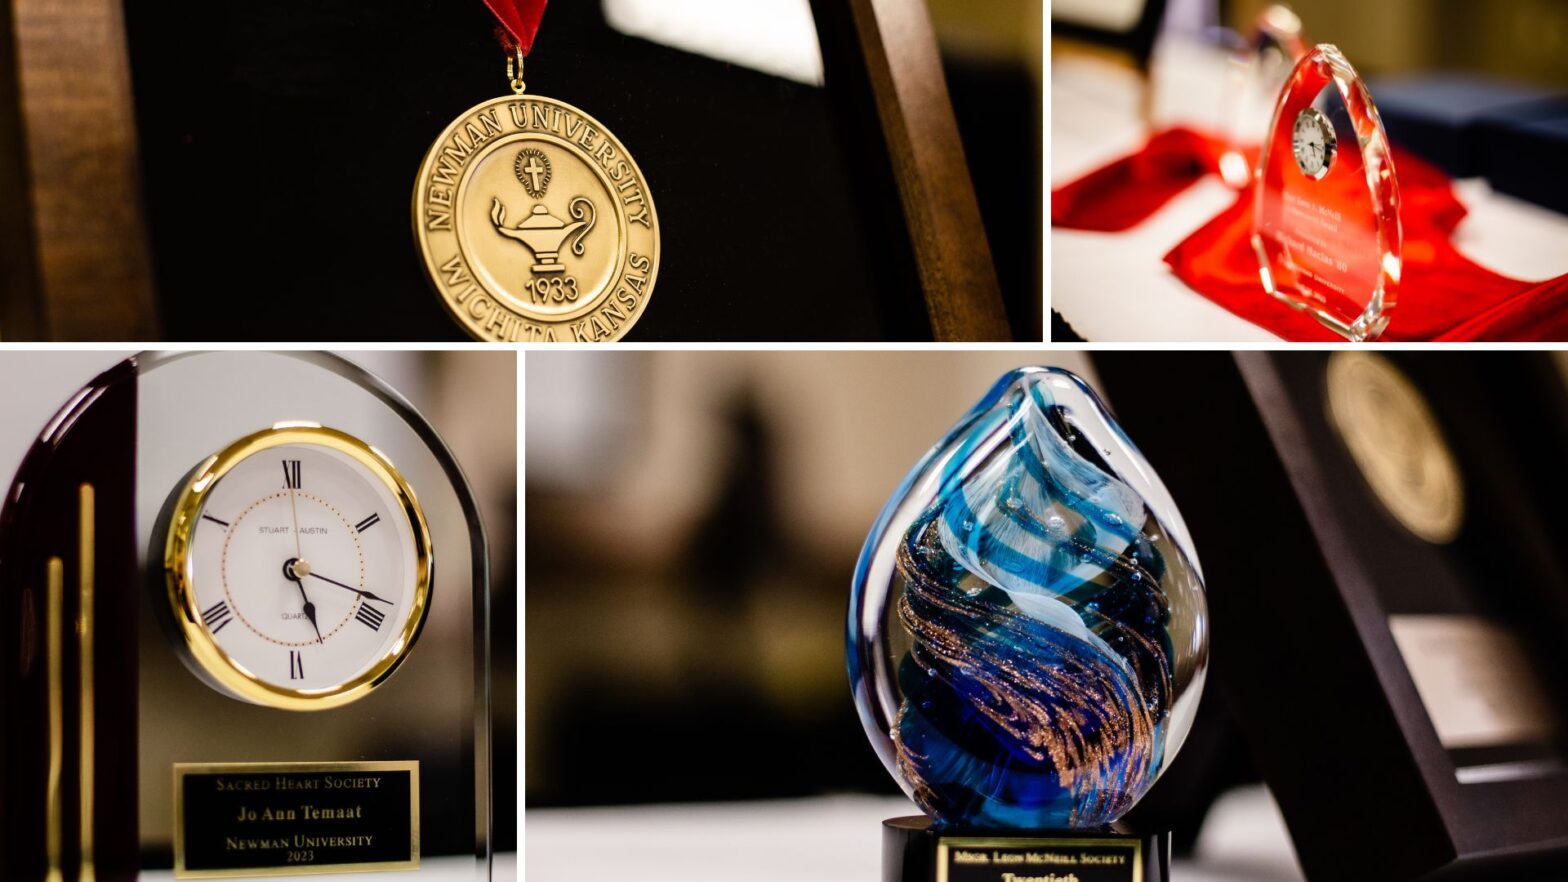 Four Newman Legacy Awards in the form of the St. Newman Medal, two clocks set in a crystal glass award and a blue glass swirled award.